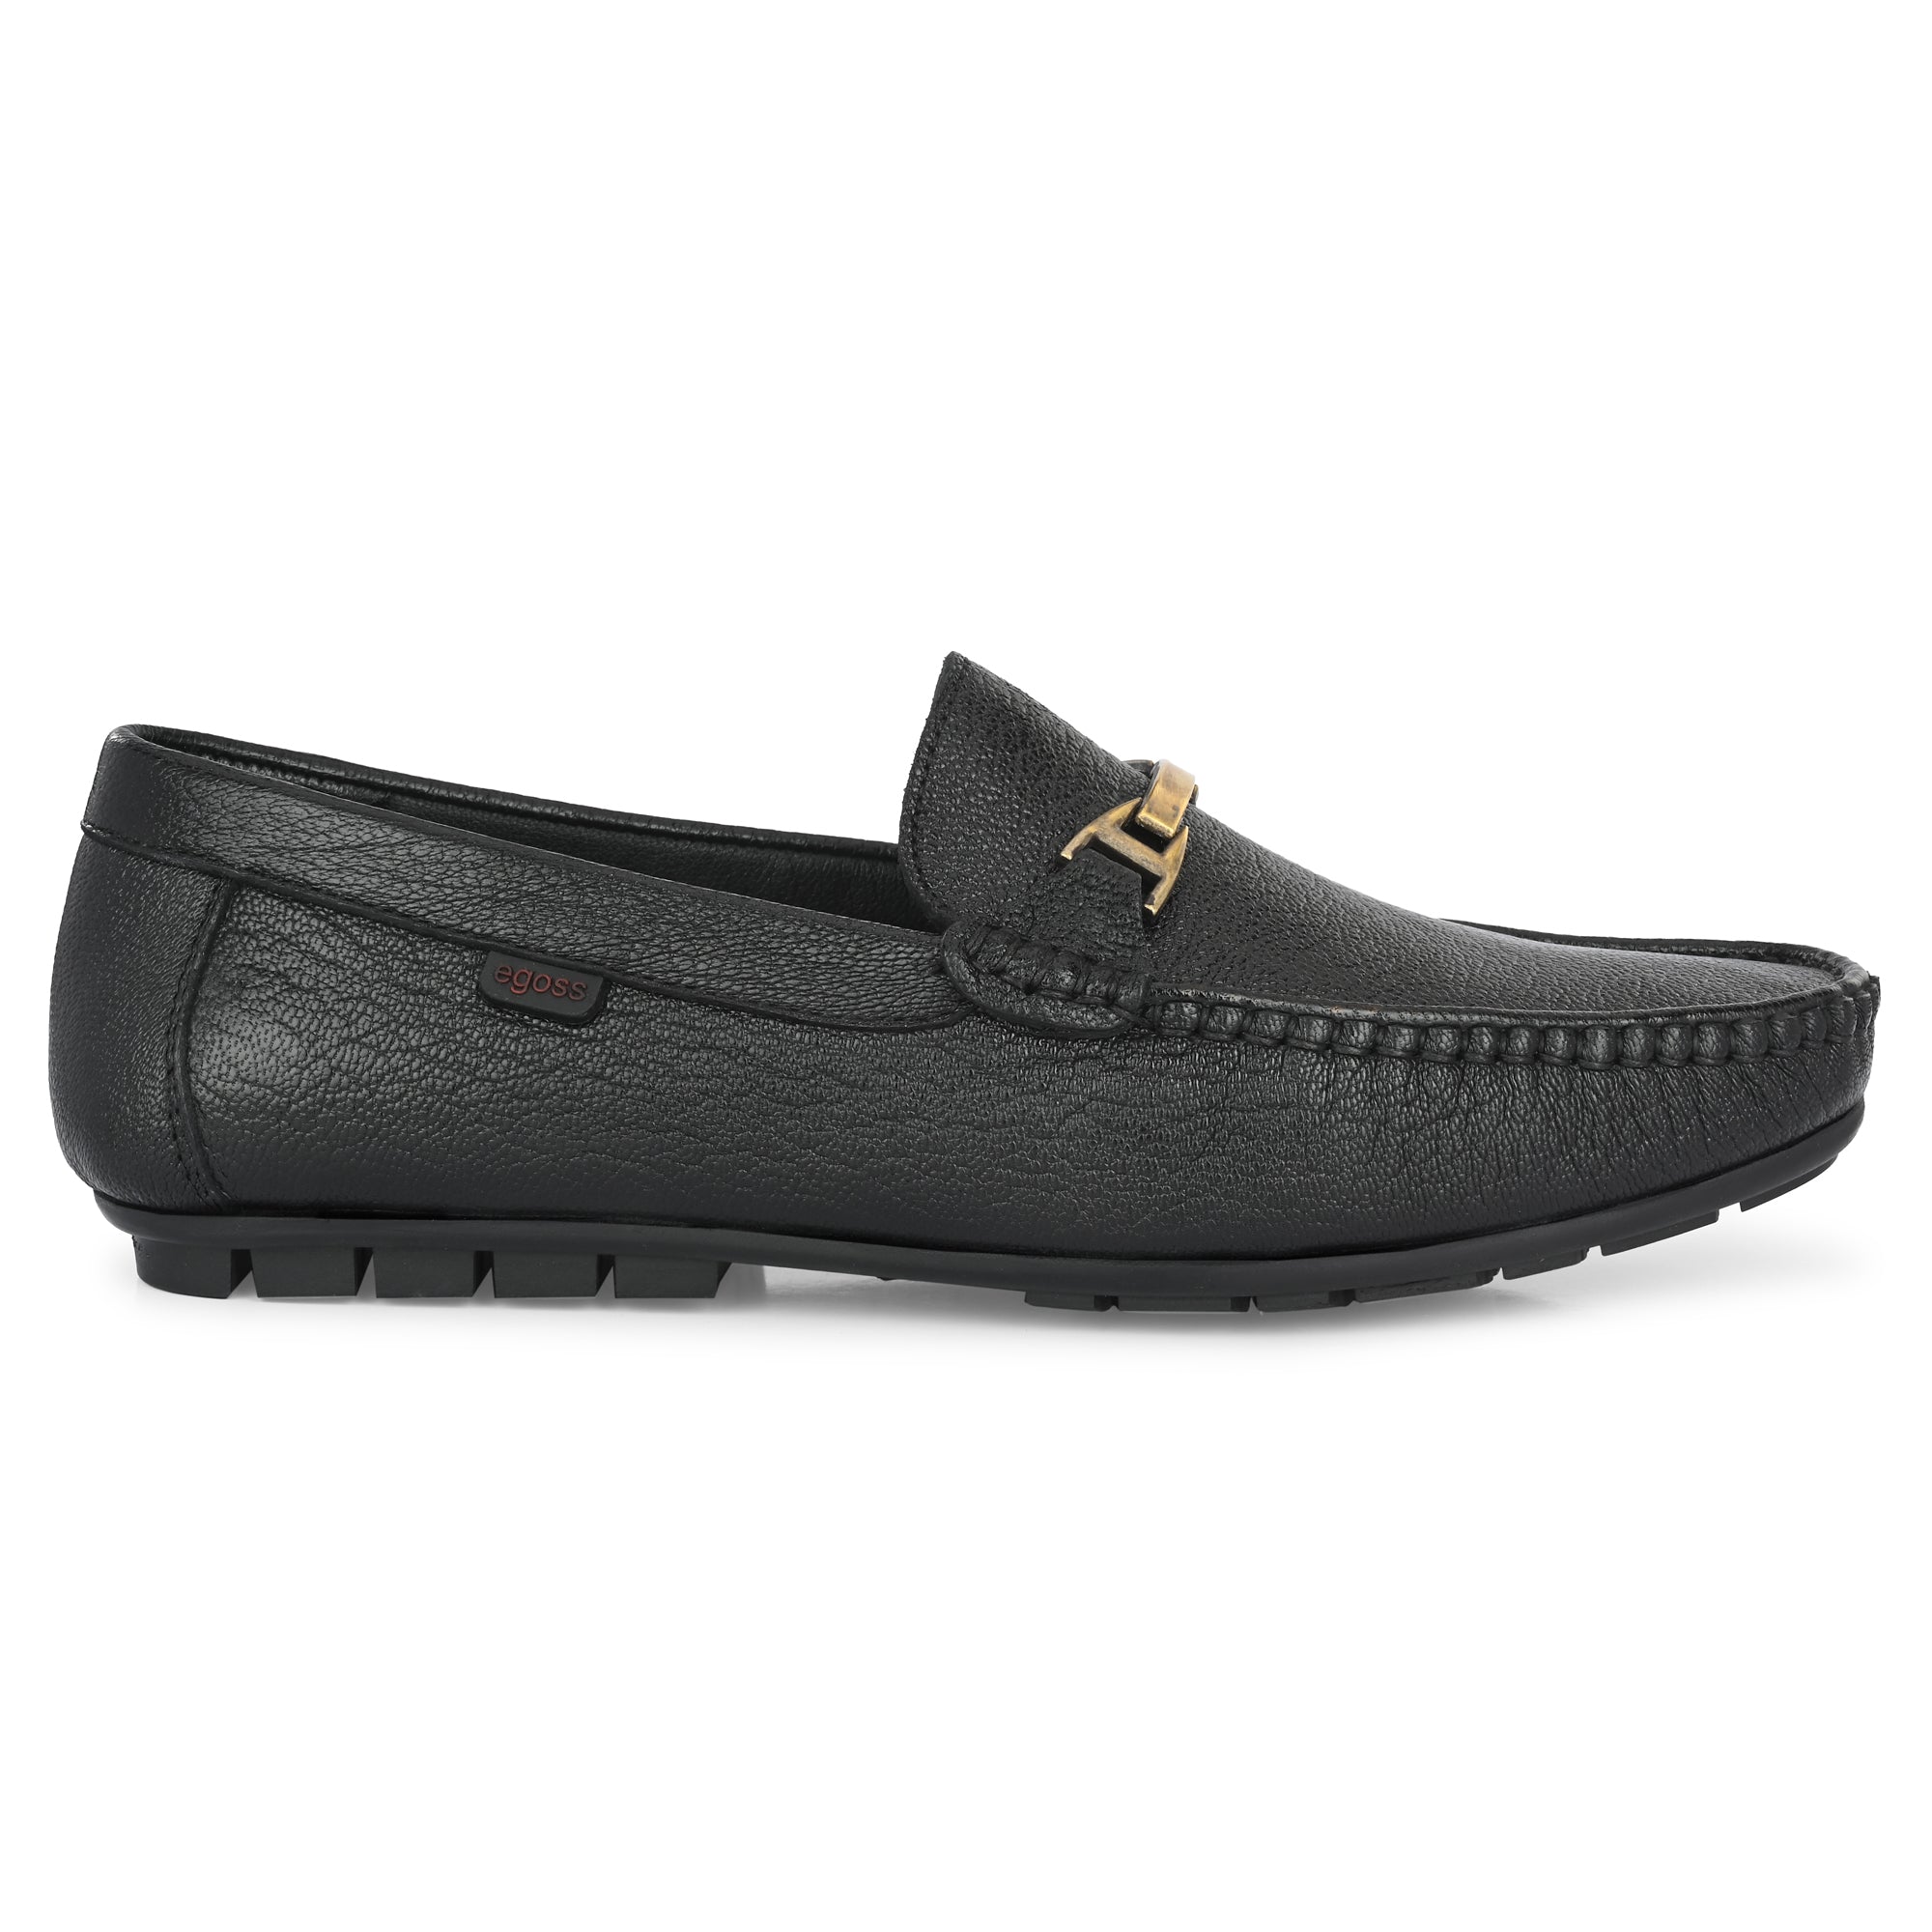 Leather Loafers Shoes For Men